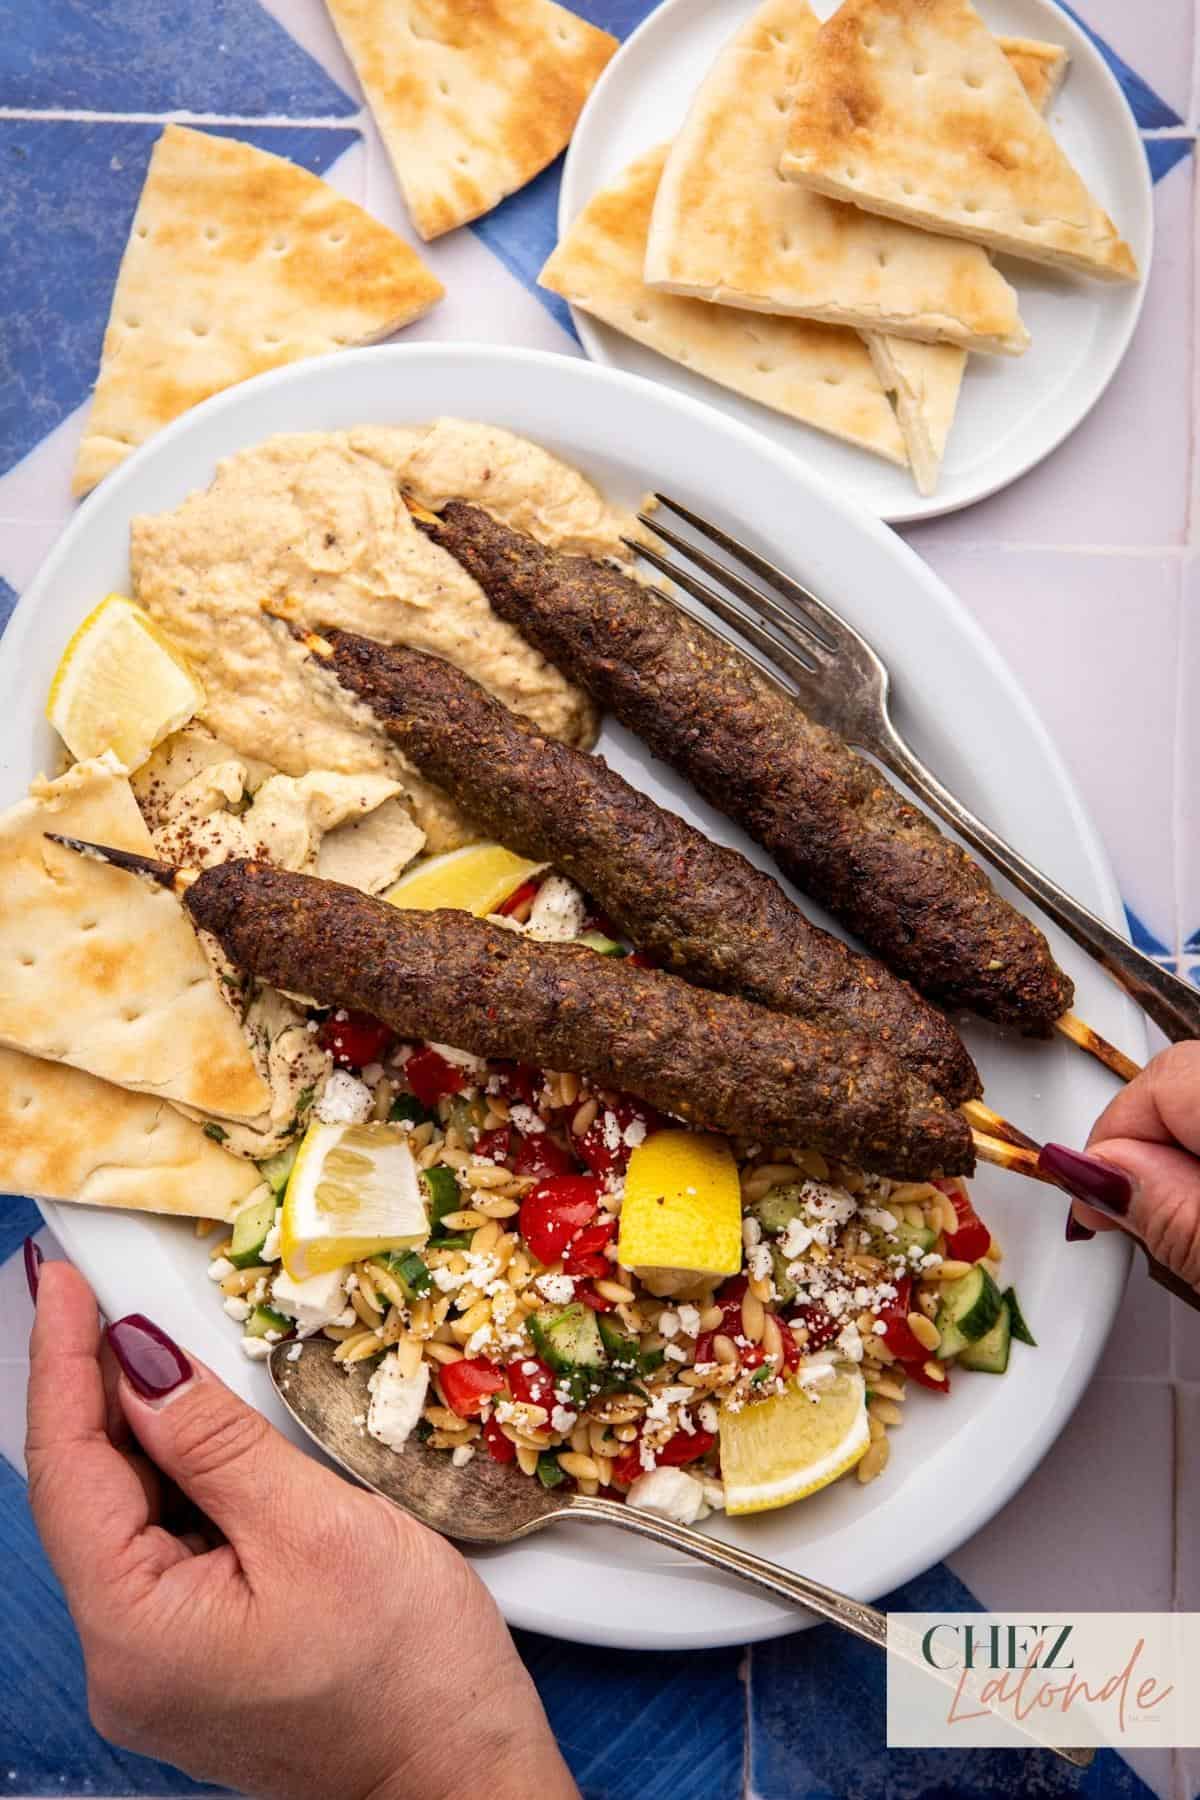 I was having a Mediterranean platter with 3 skewers of air fryer Kofta Kebabs, served with Orzo and cucumber salad , pita bread, baba ganoush, and Hummus.